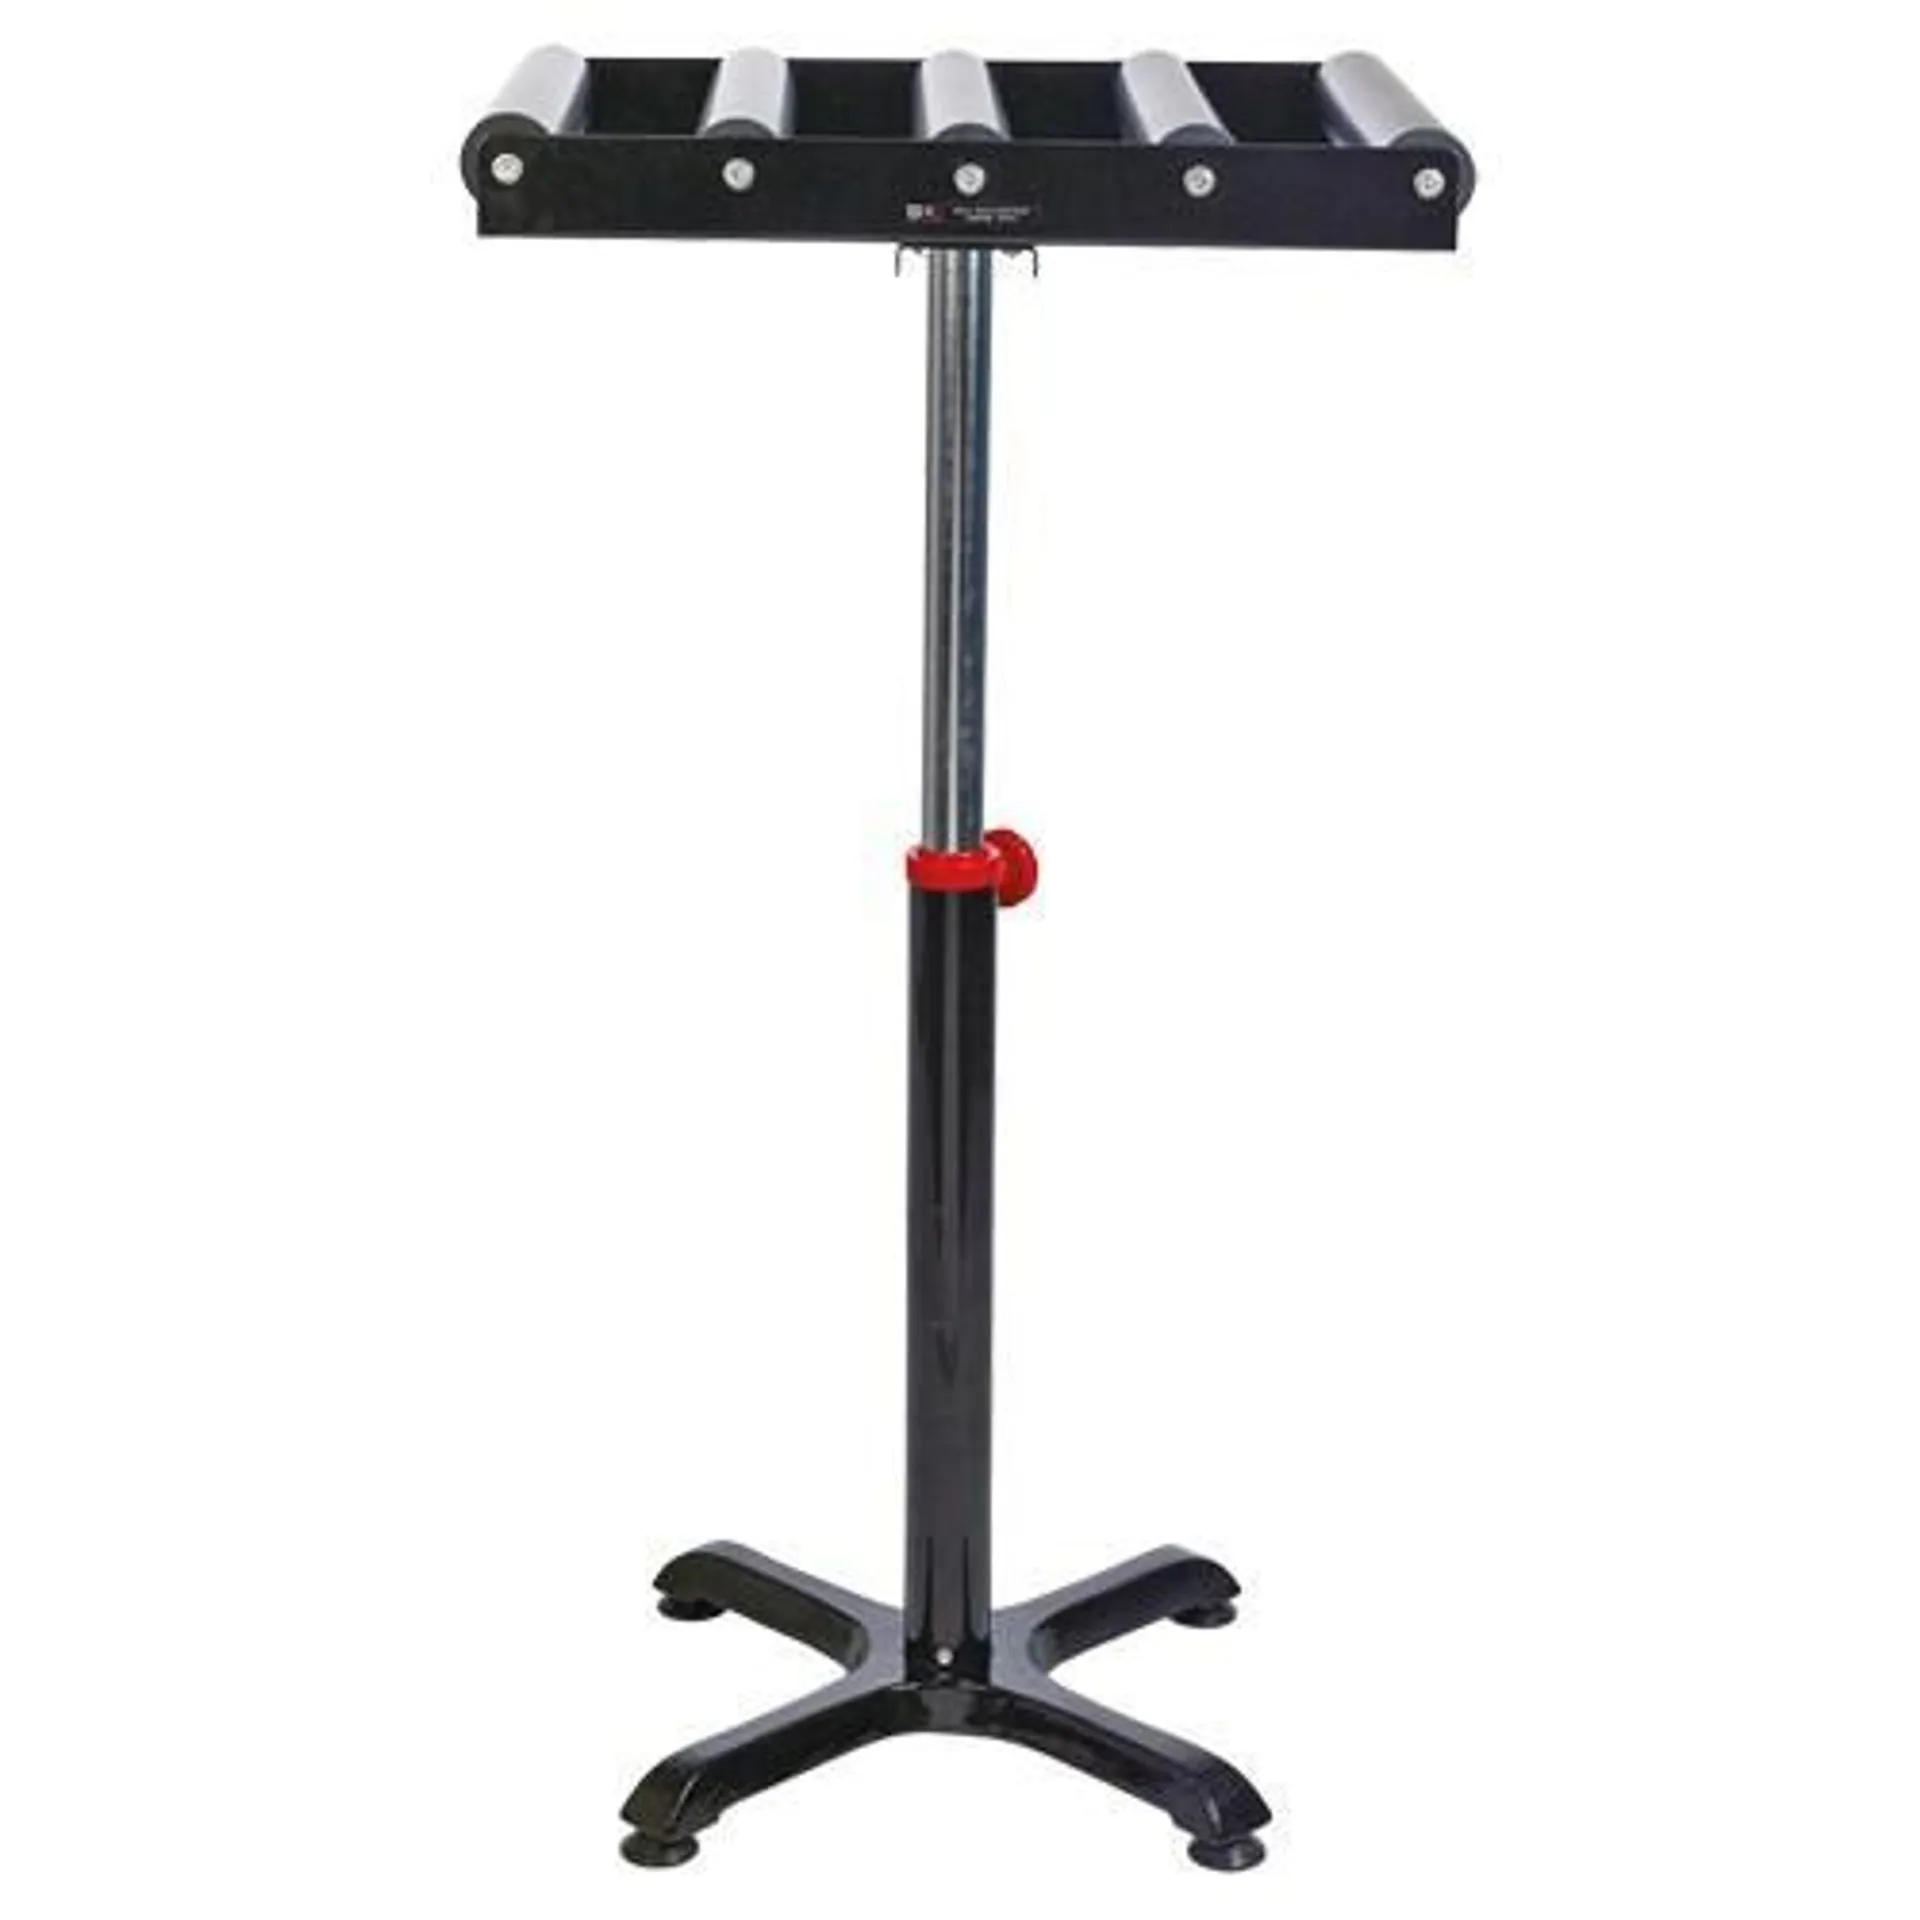 01381 Heavy Duty Roller Stand - 5 Rollers 100Kg Capacity